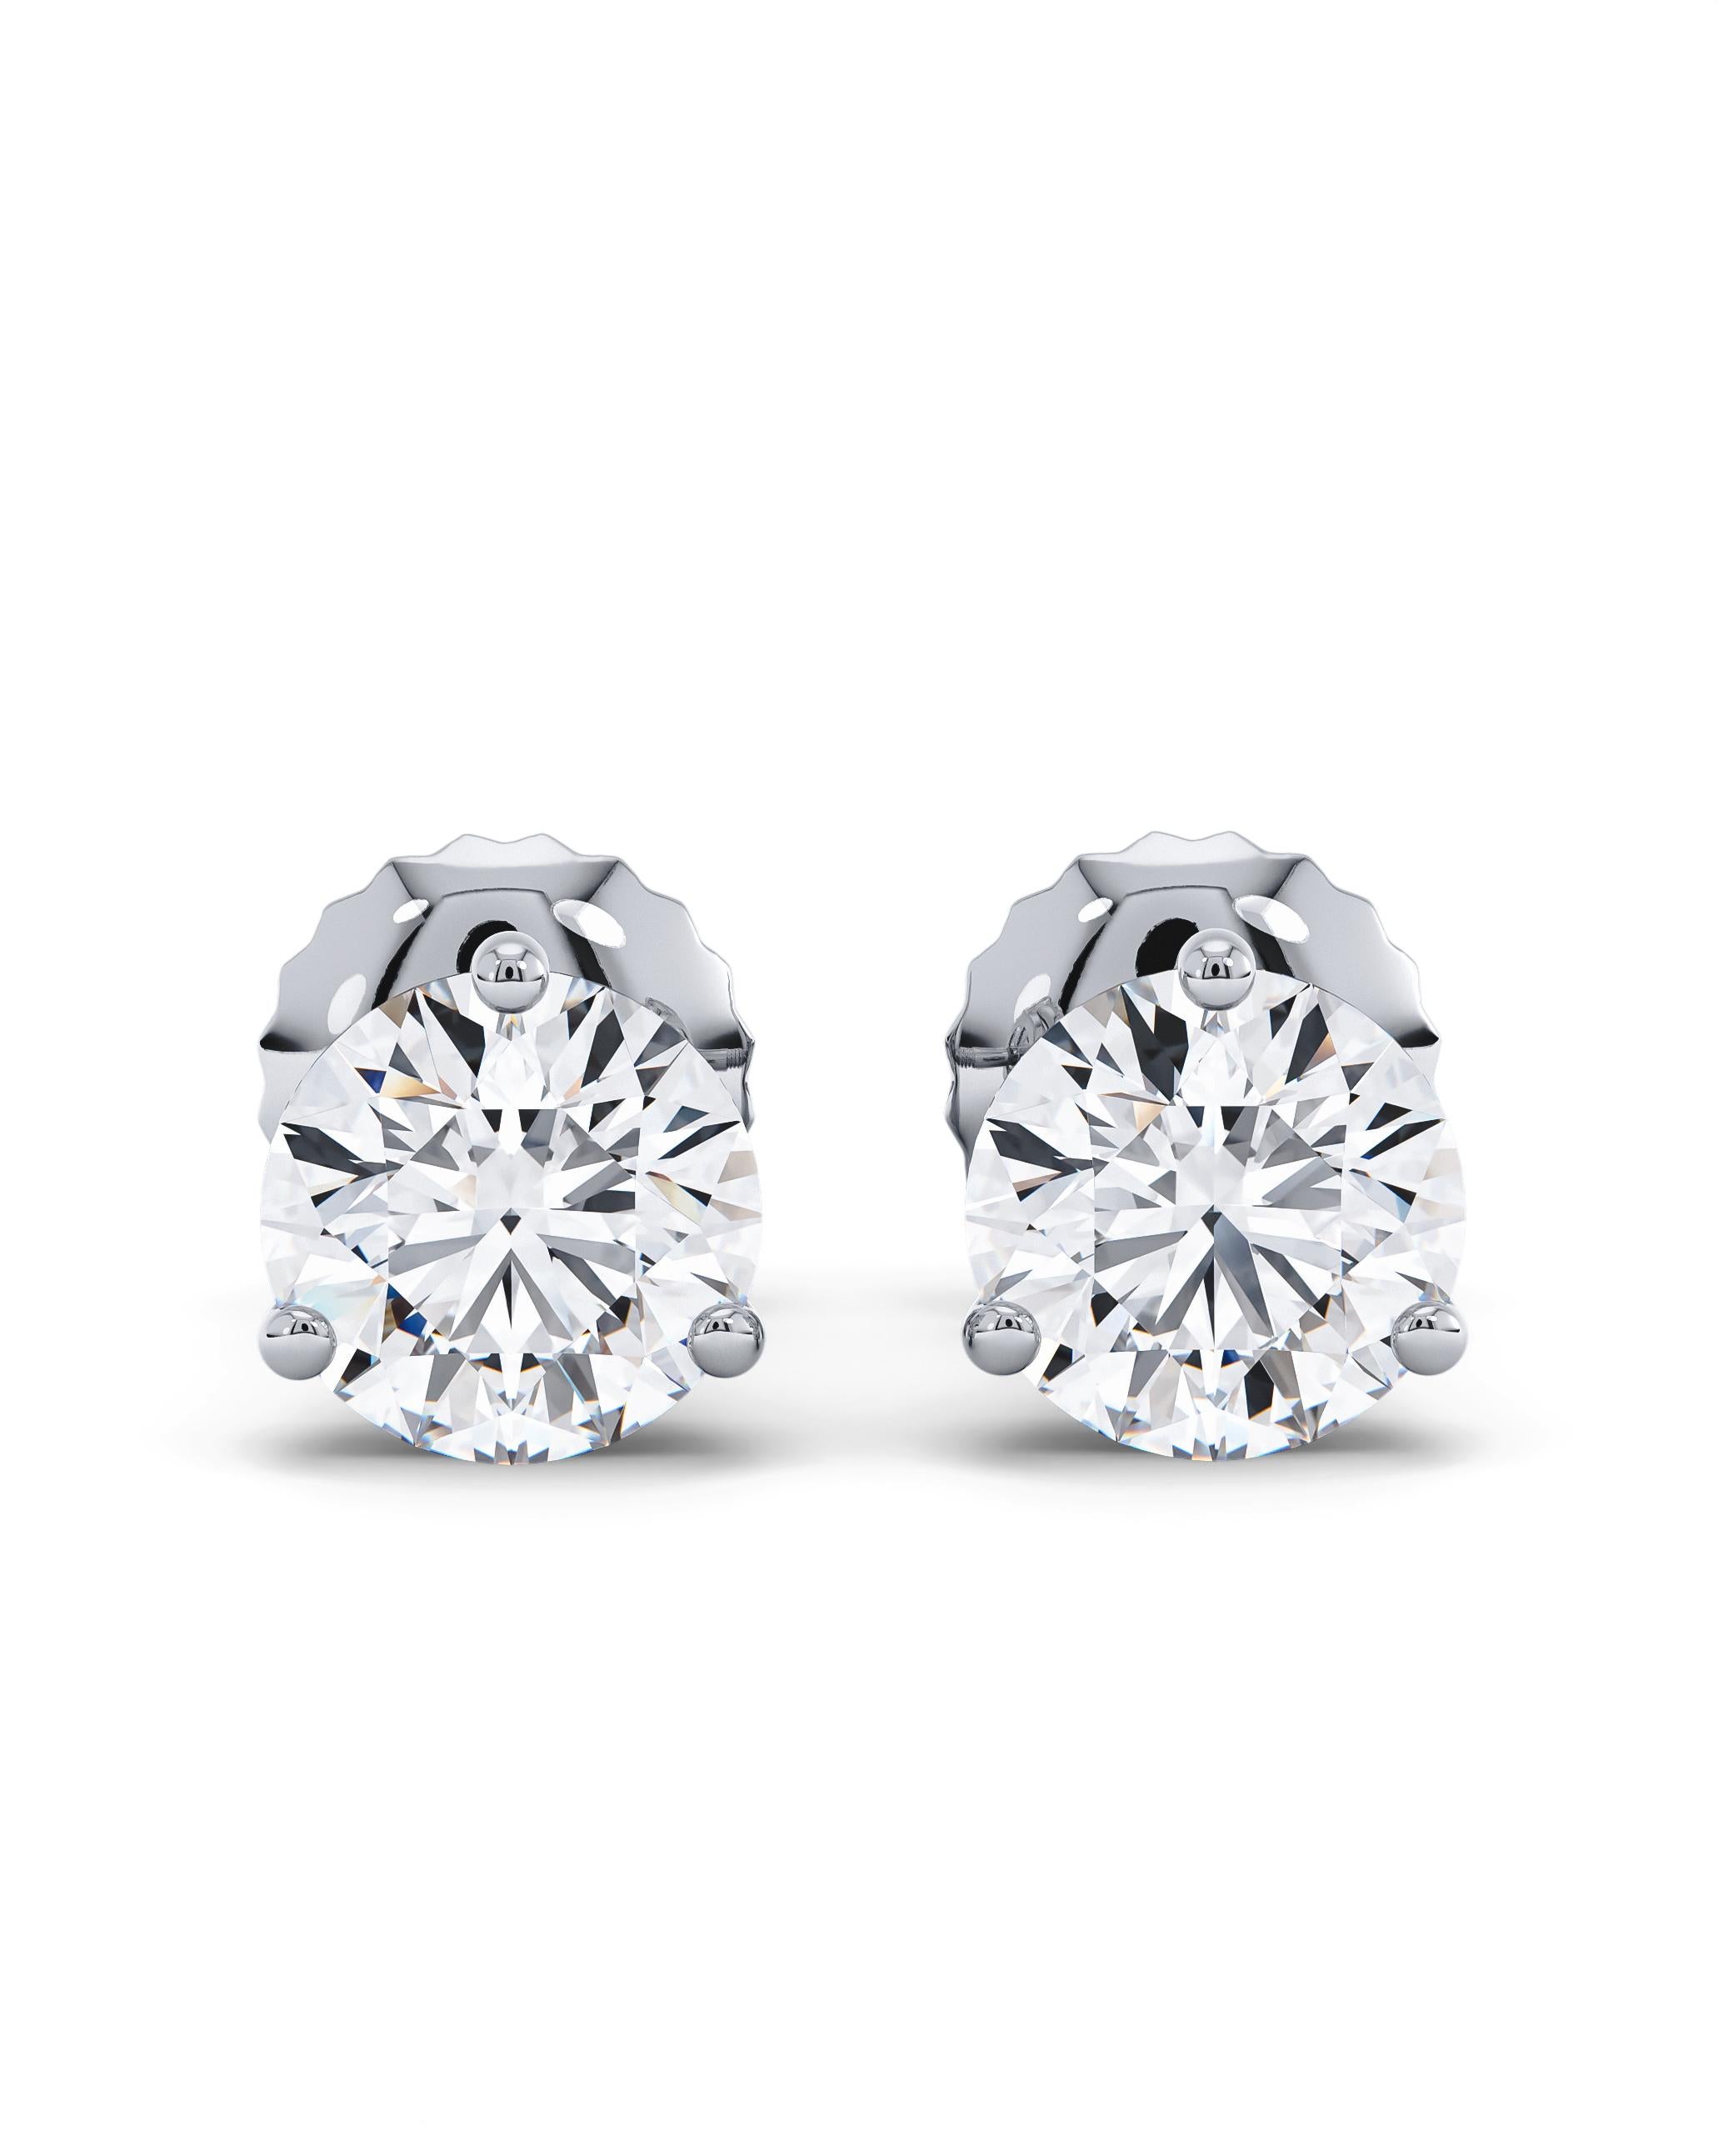 Women's 3 Carat Total Diamond Weight Natural Diamond Stud Earrings with Screwbacks For Sale